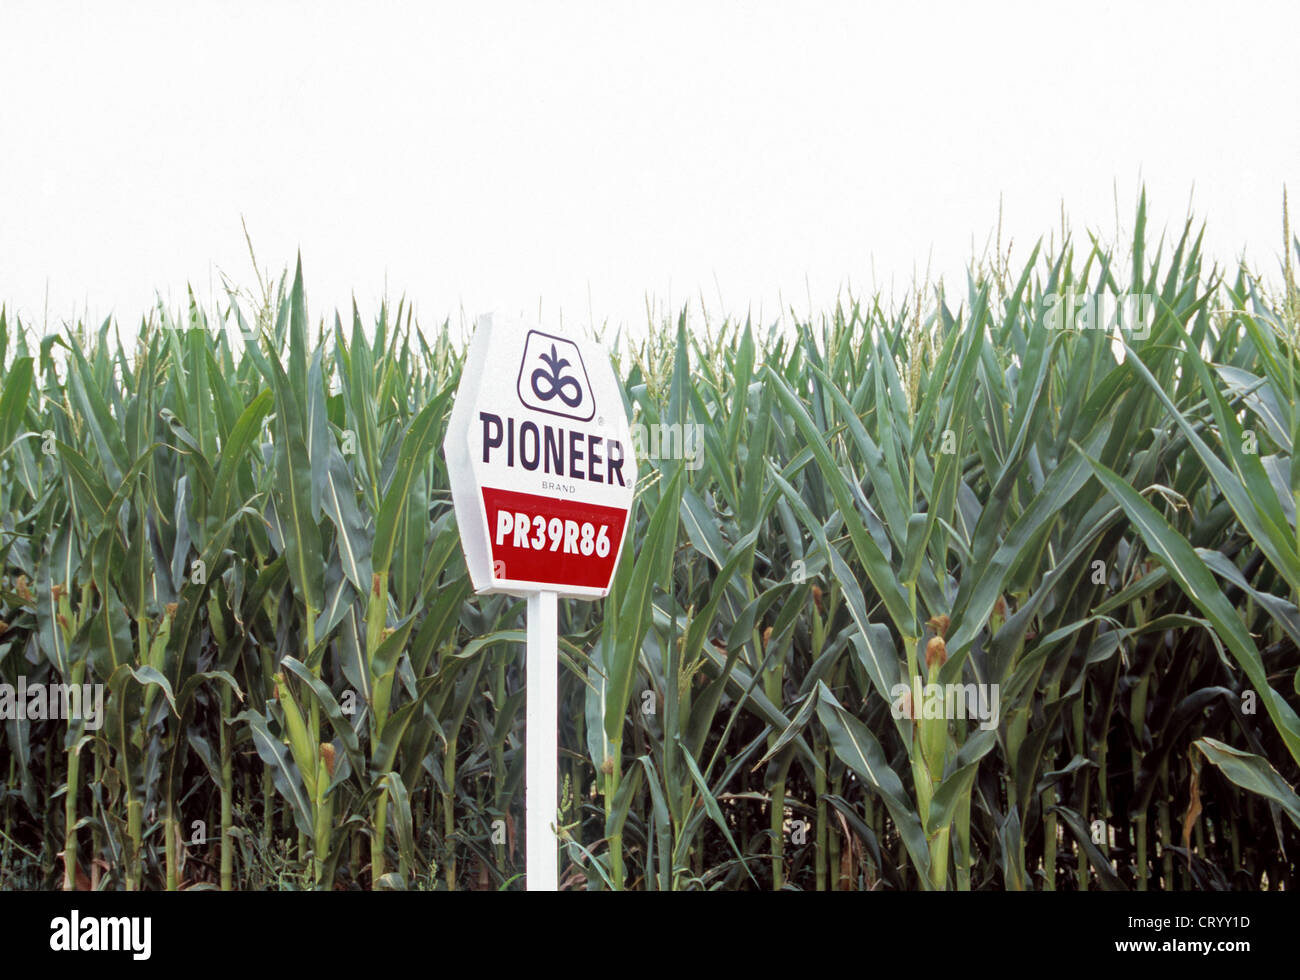 Corn field with signs of different varieties and breeds Stock Photo